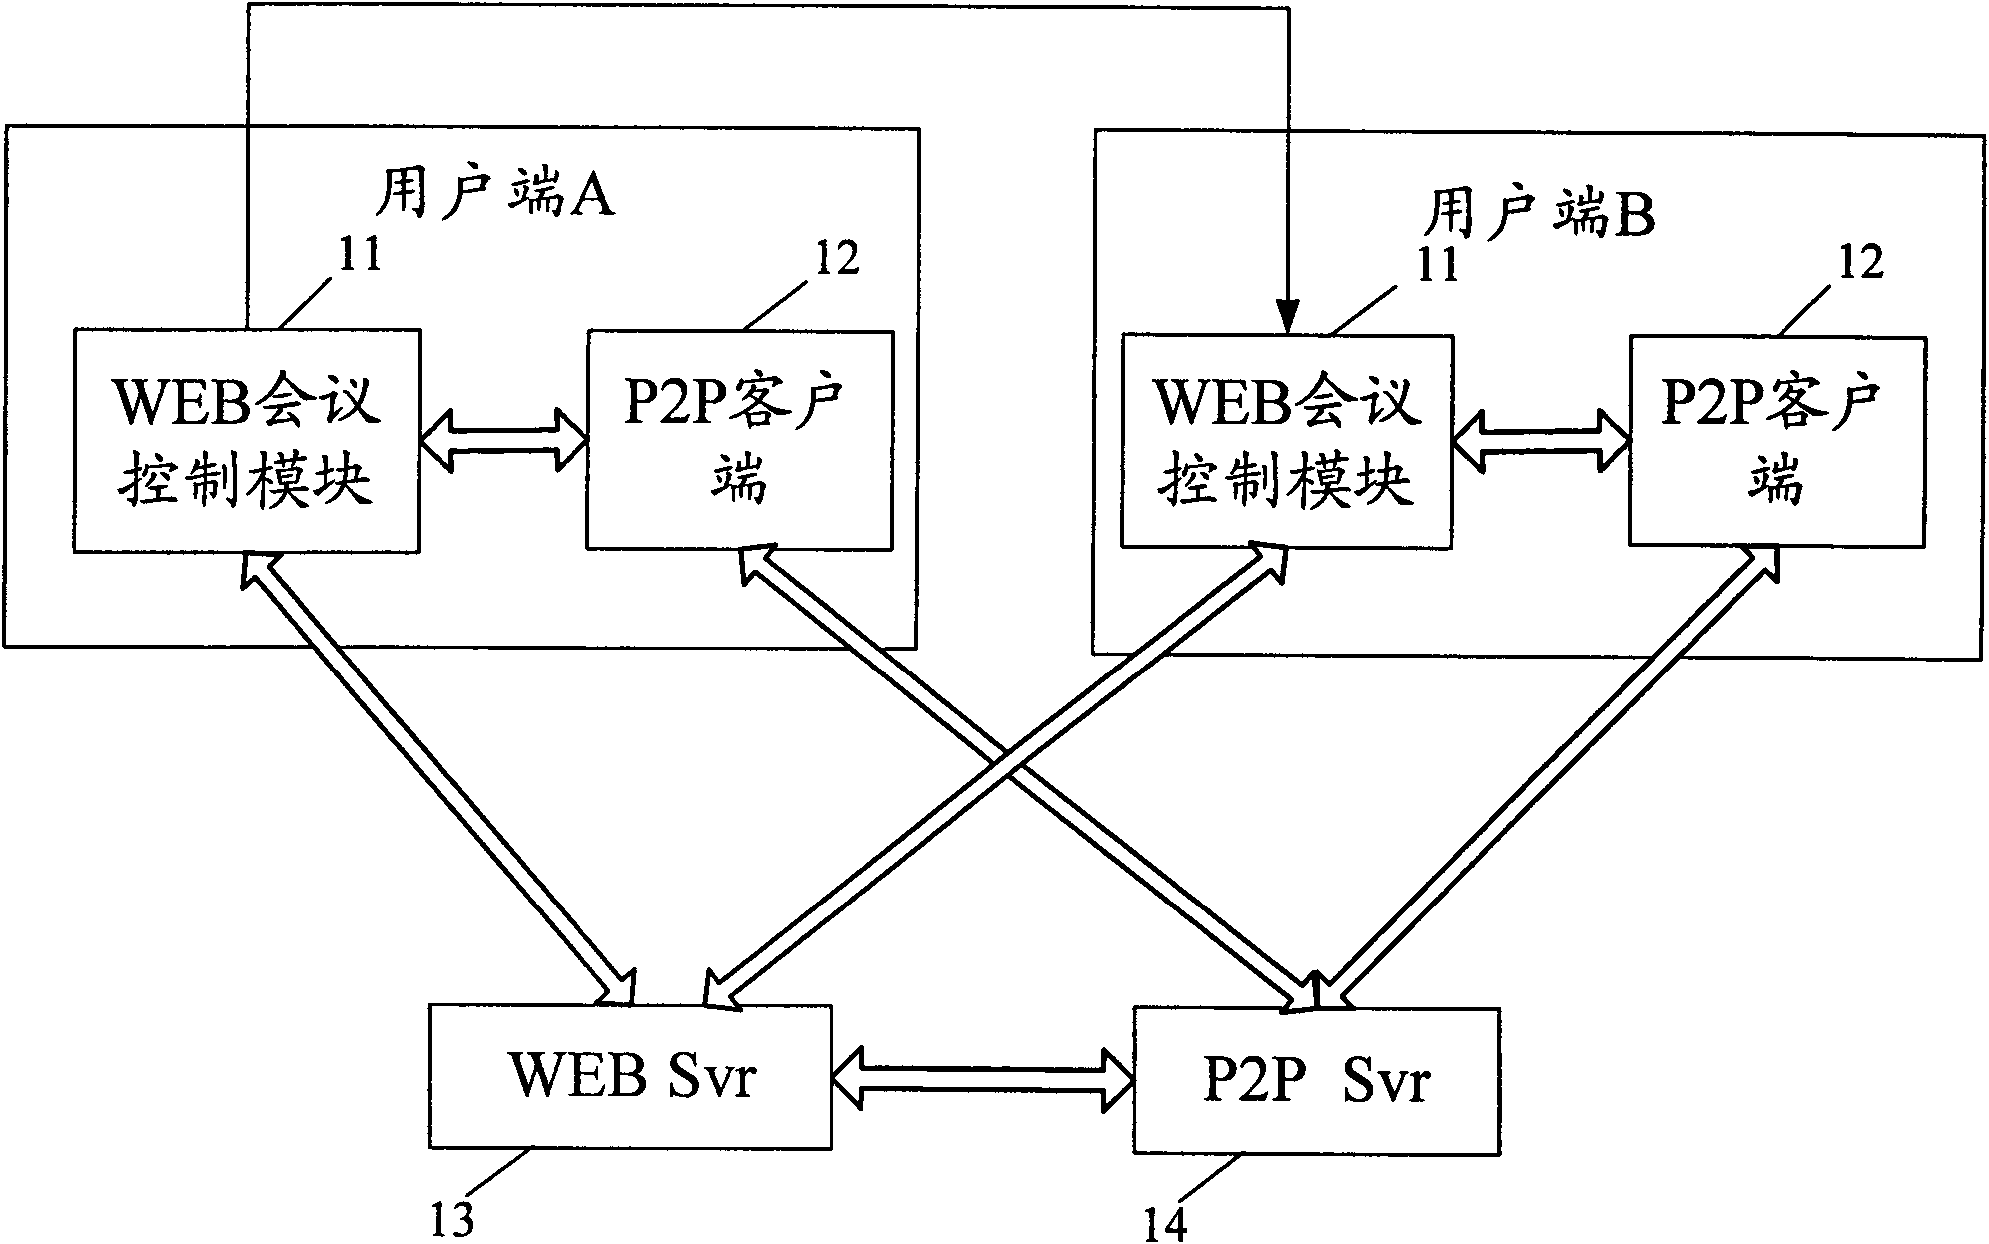 System and method using point-to-point technology to realize file sharing